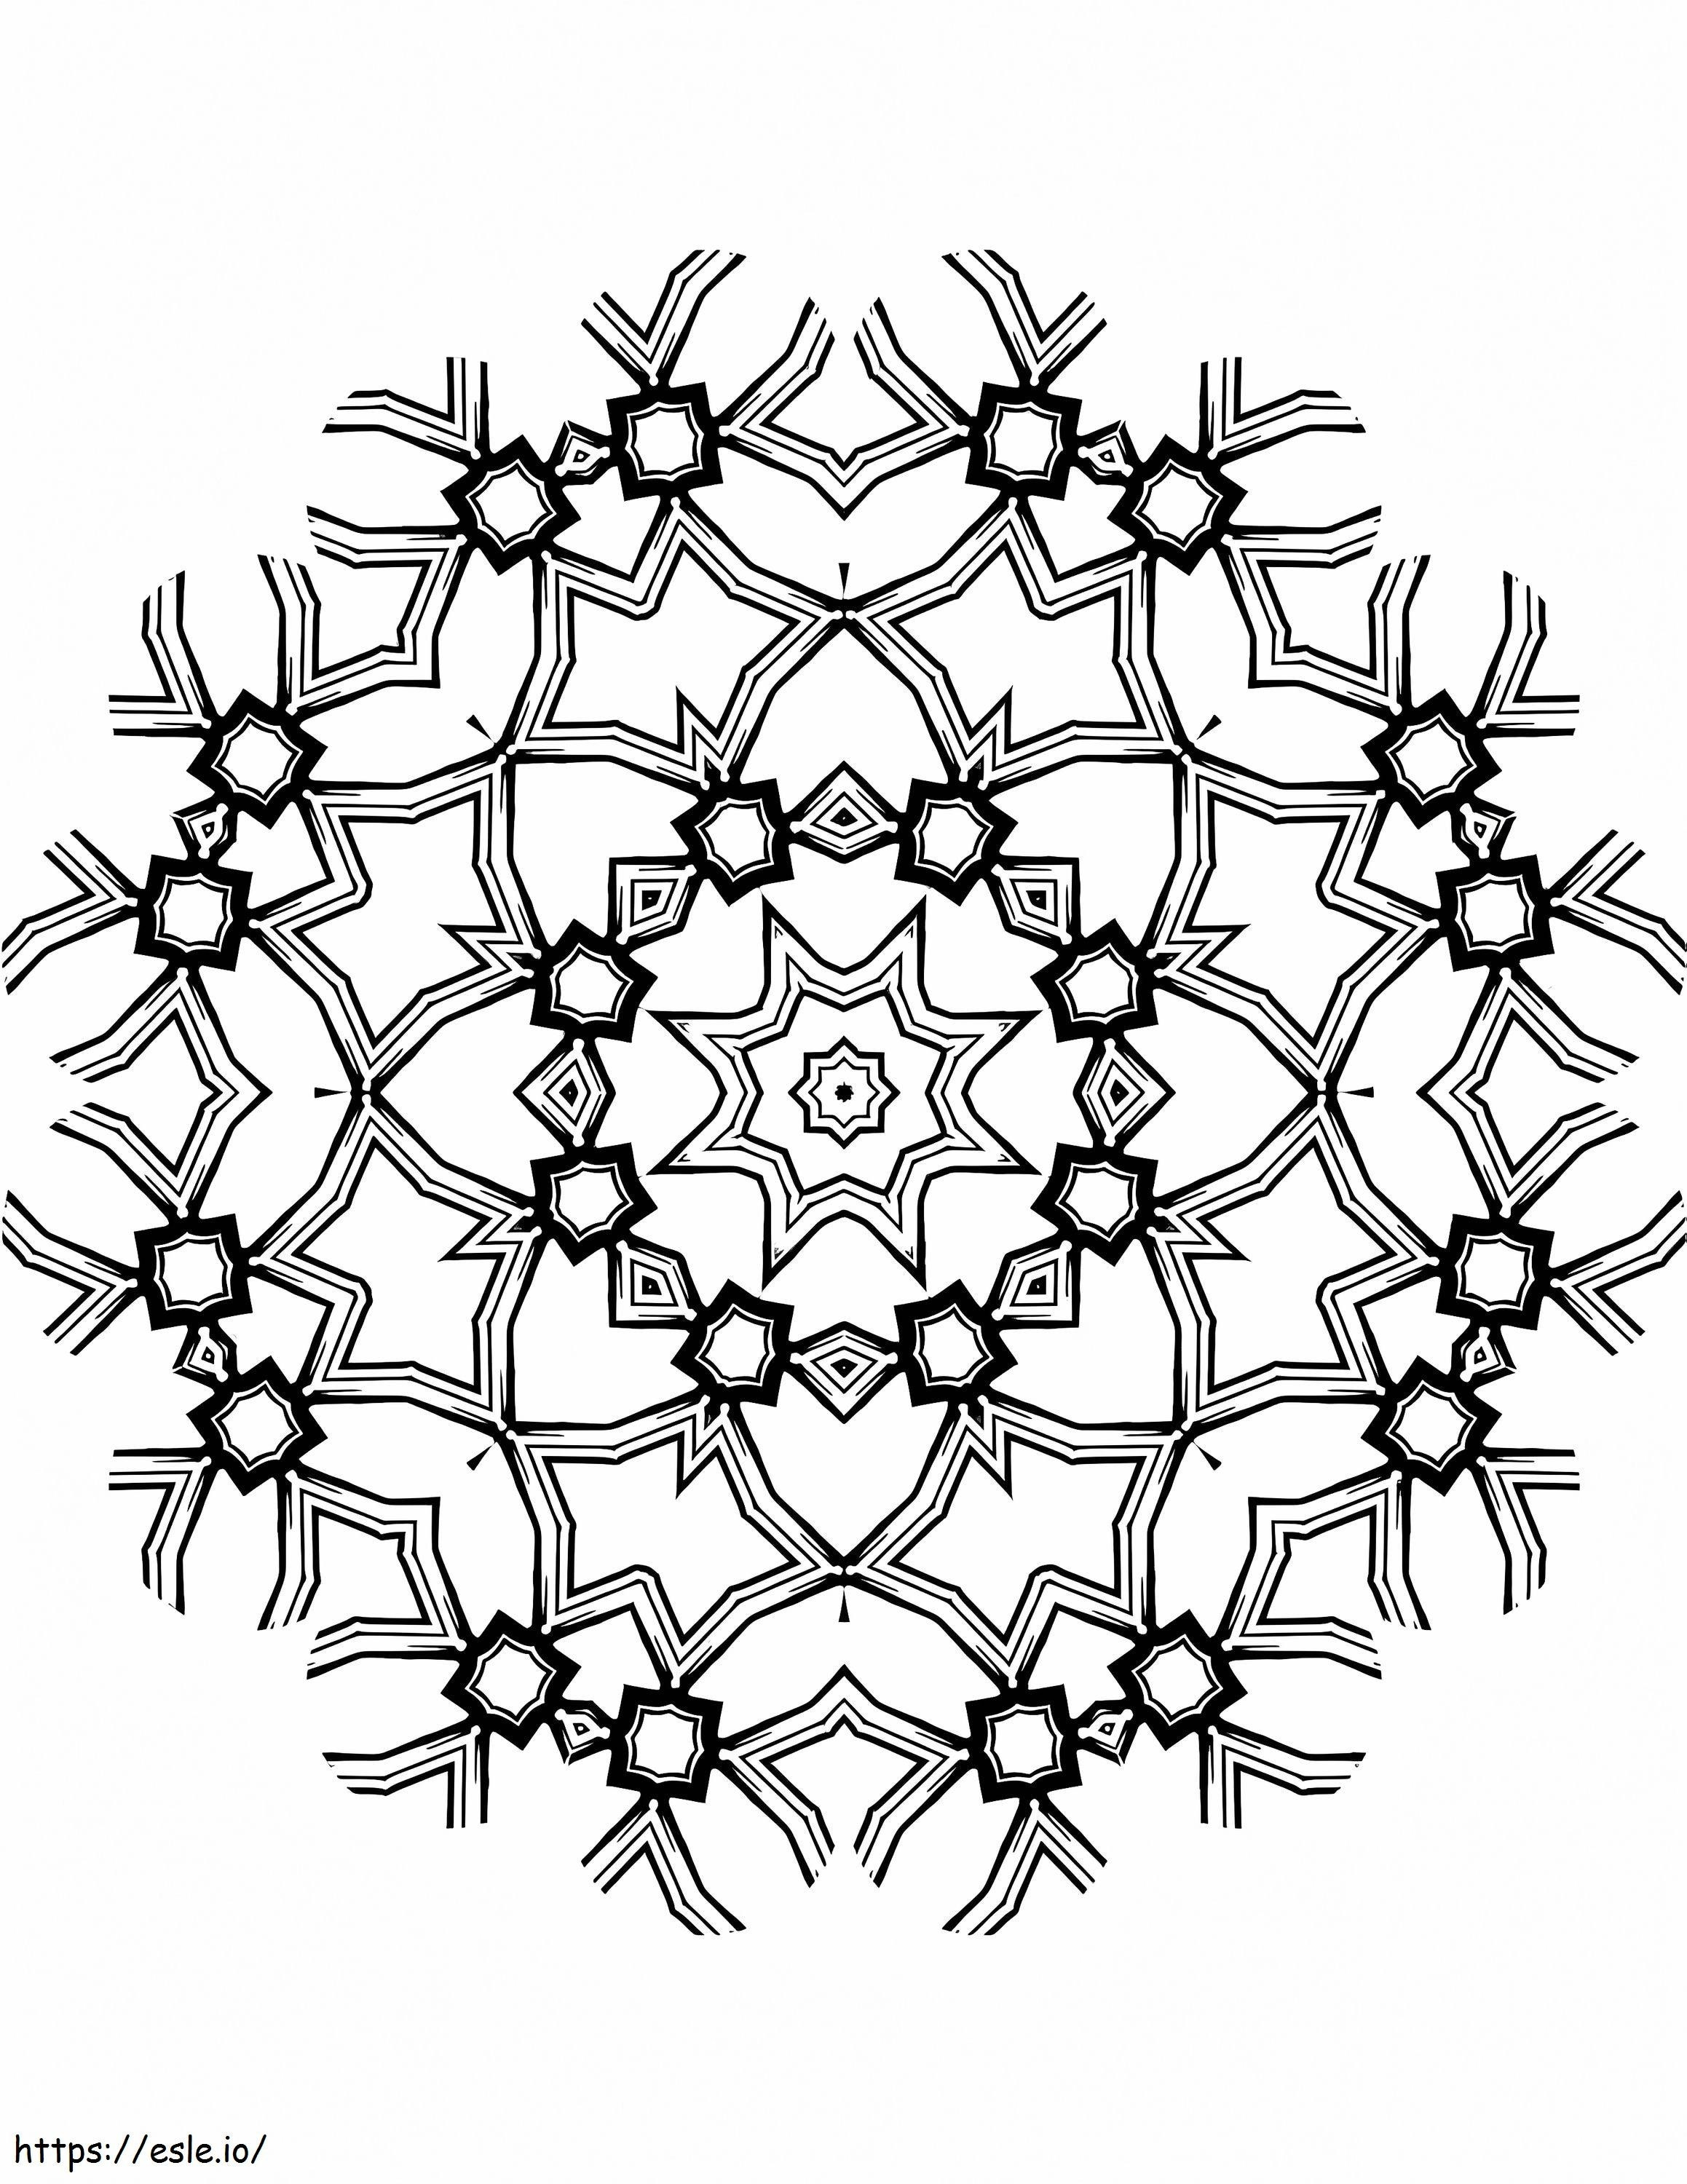 Kaleidoscope 3 coloring page